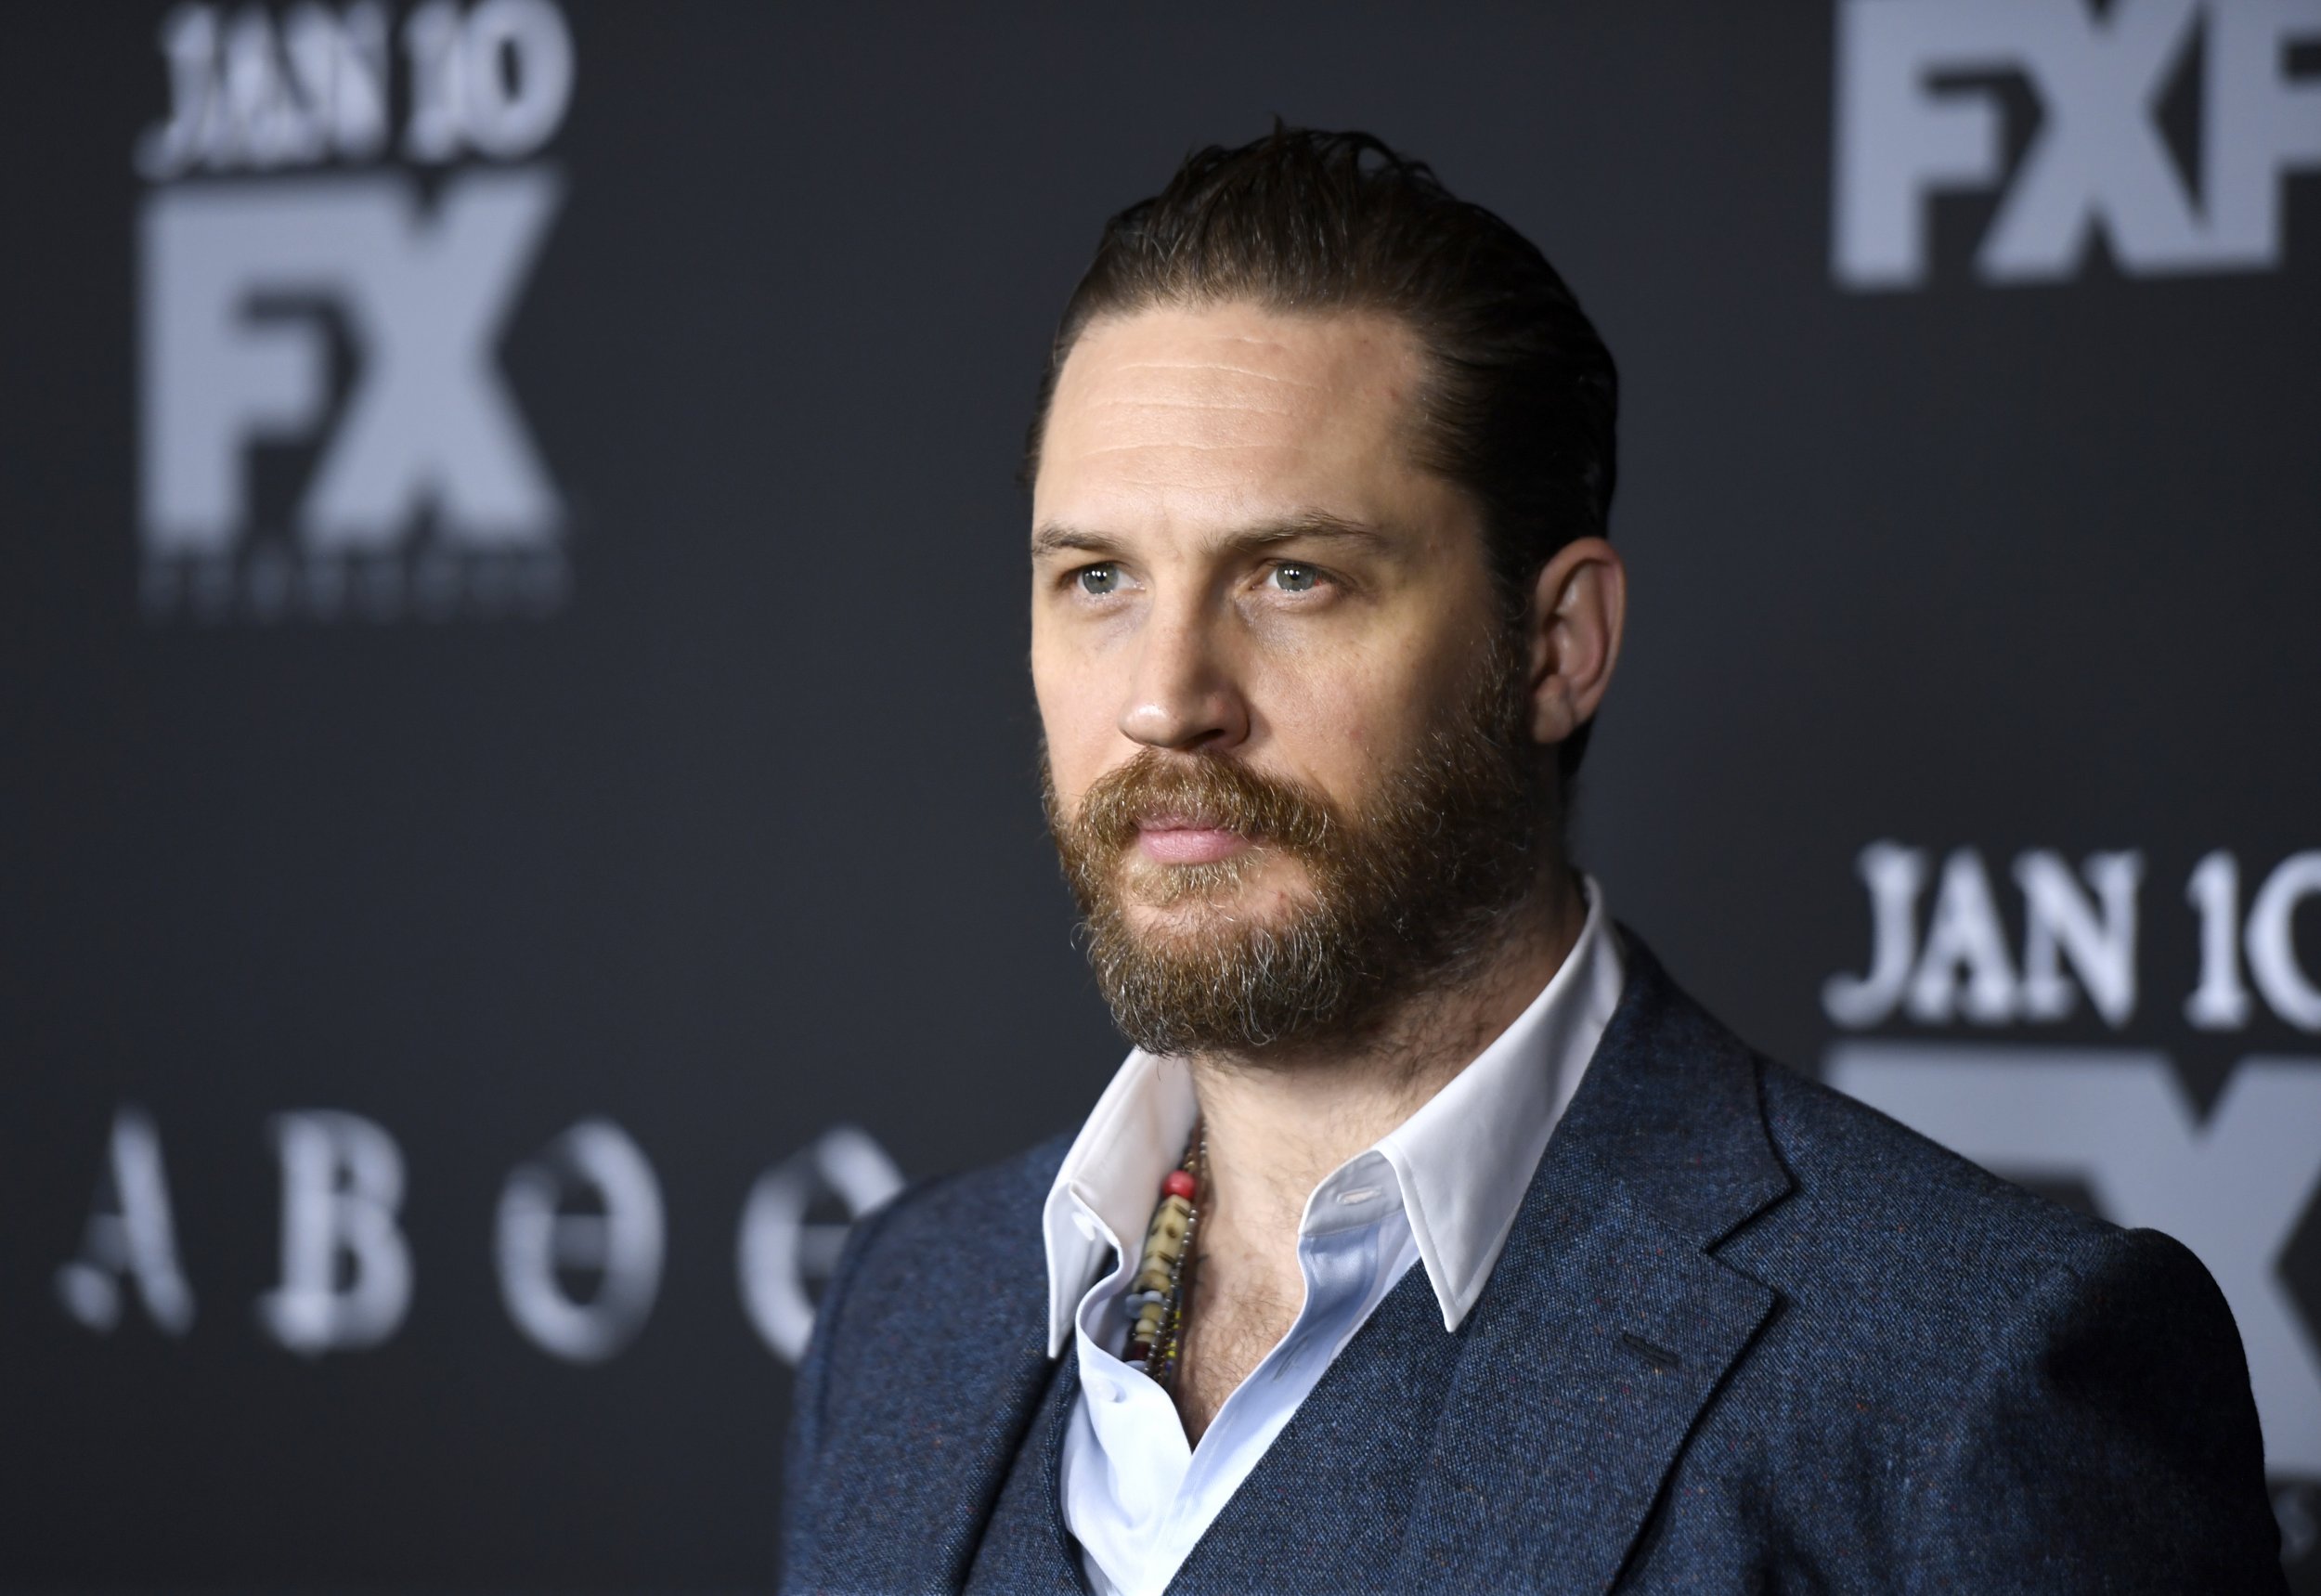 Who Will Be the Next James Bond? Pierce Brosnan Says Tom Hardy Should Get  Role